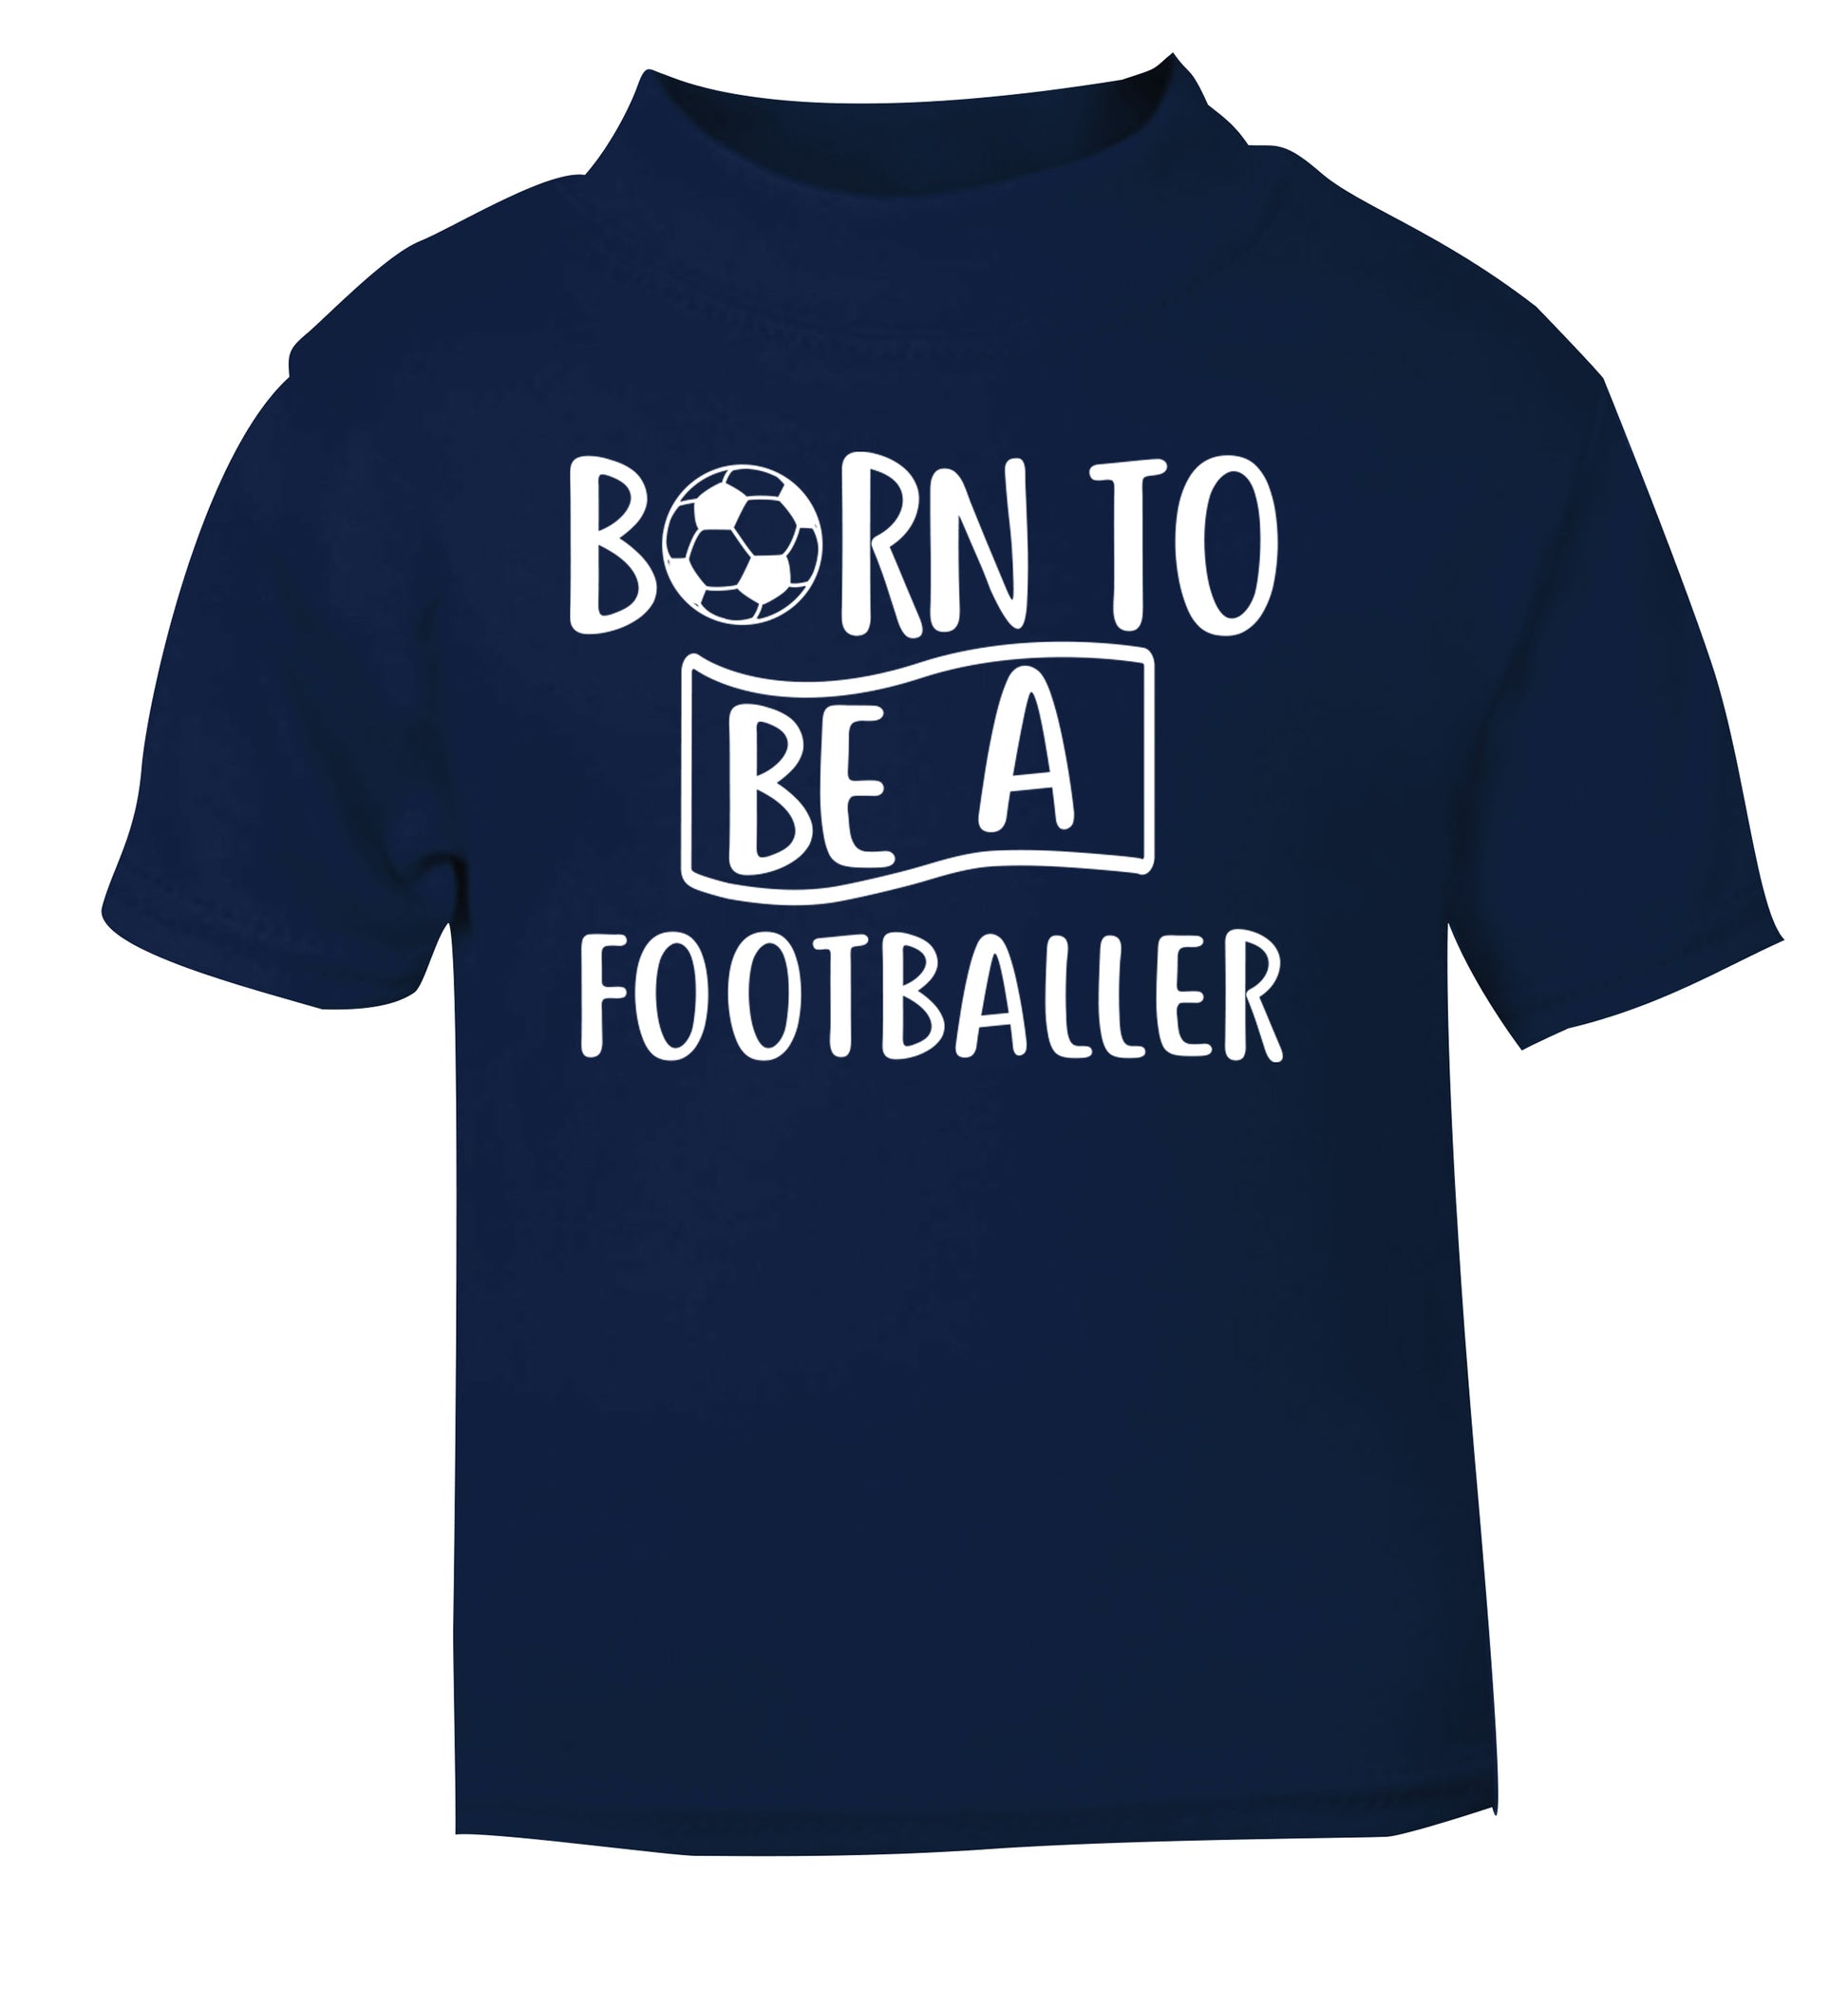 Born to be a footballer navy Baby Toddler Tshirt 2 Years